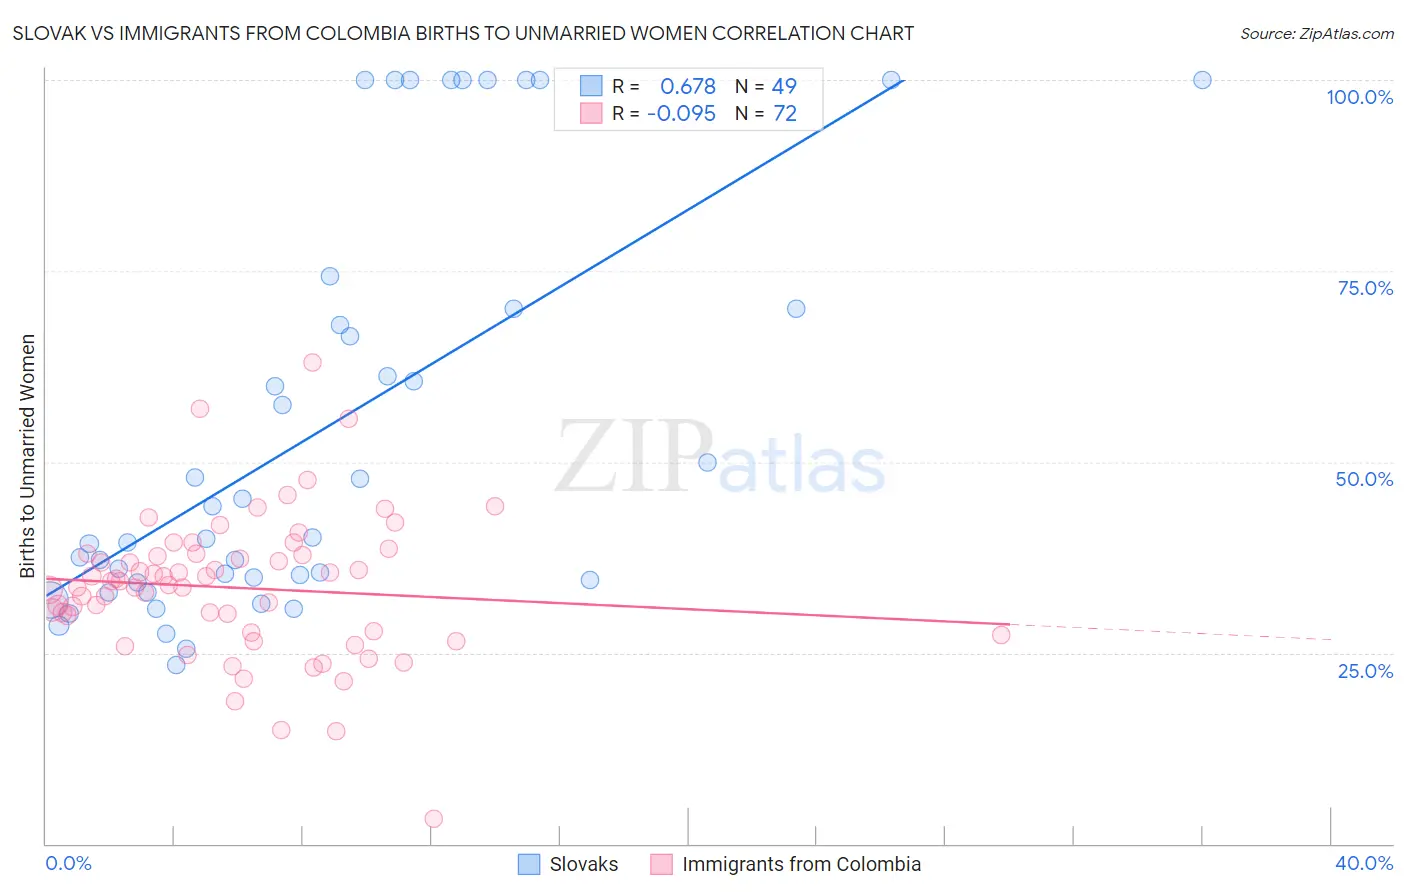 Slovak vs Immigrants from Colombia Births to Unmarried Women